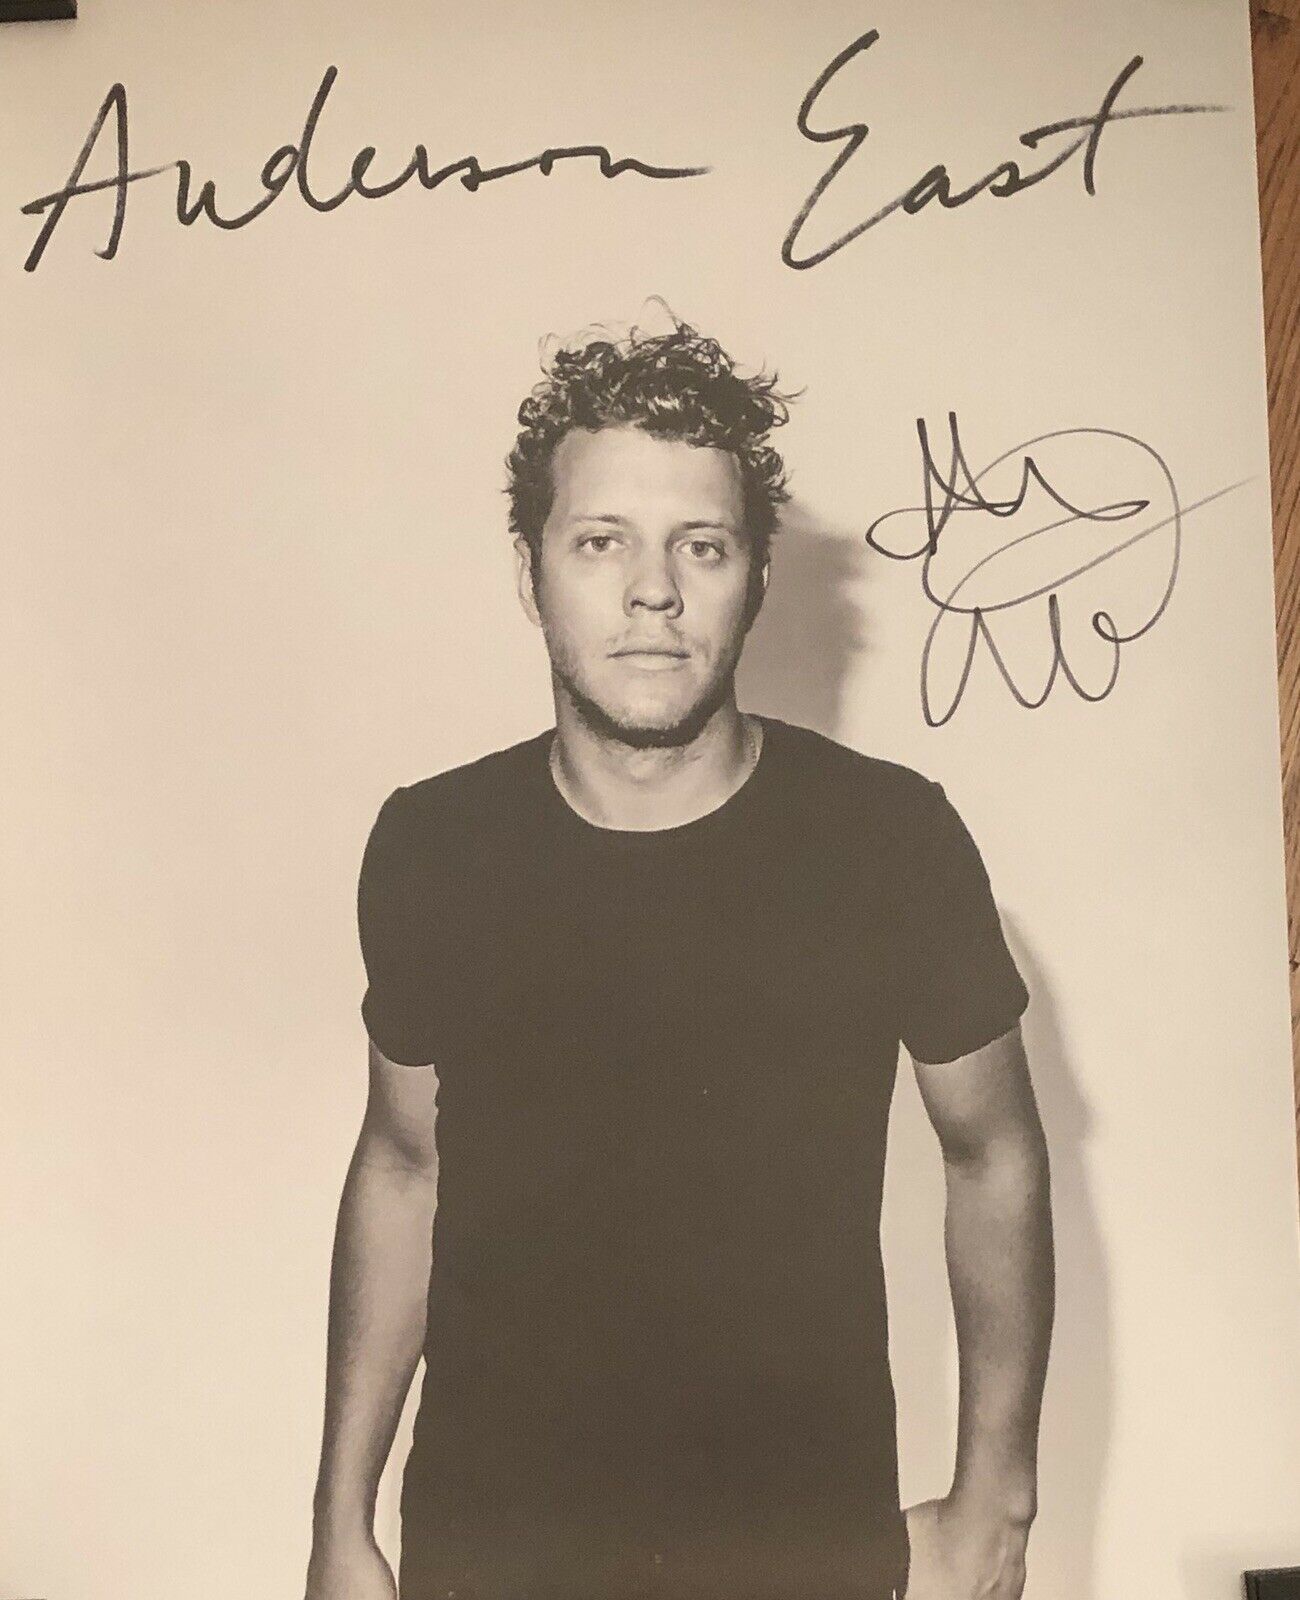 Anderson East Signed Poster Autographed 18x24